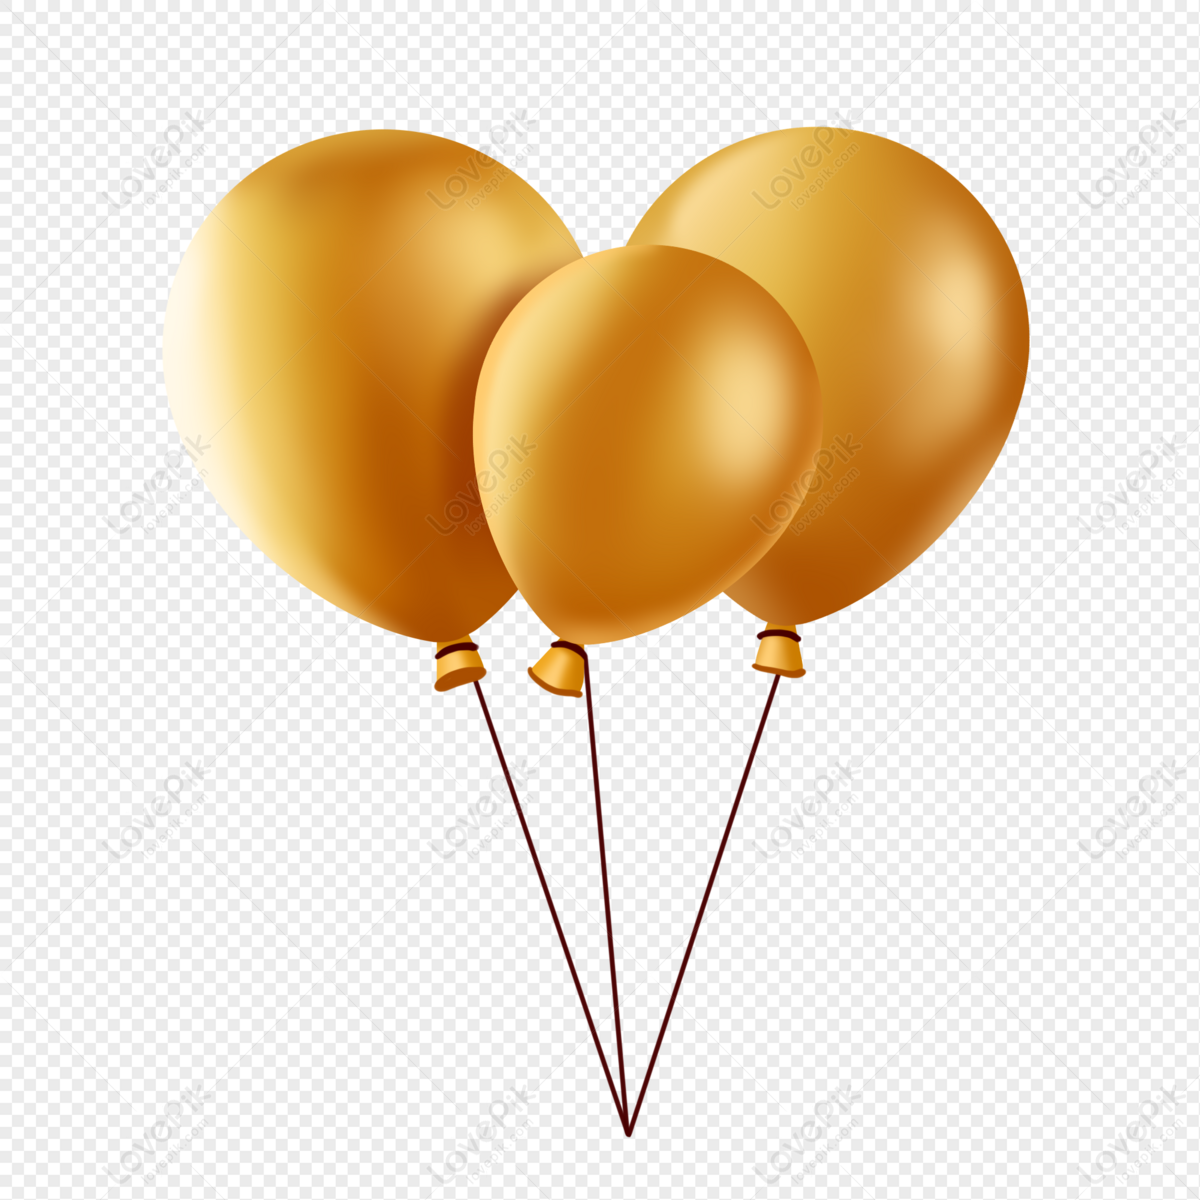 A Bundle Of Golden Balloons PNG Transparent Background And Clipart Image  For Free Download - Lovepik | 401556060